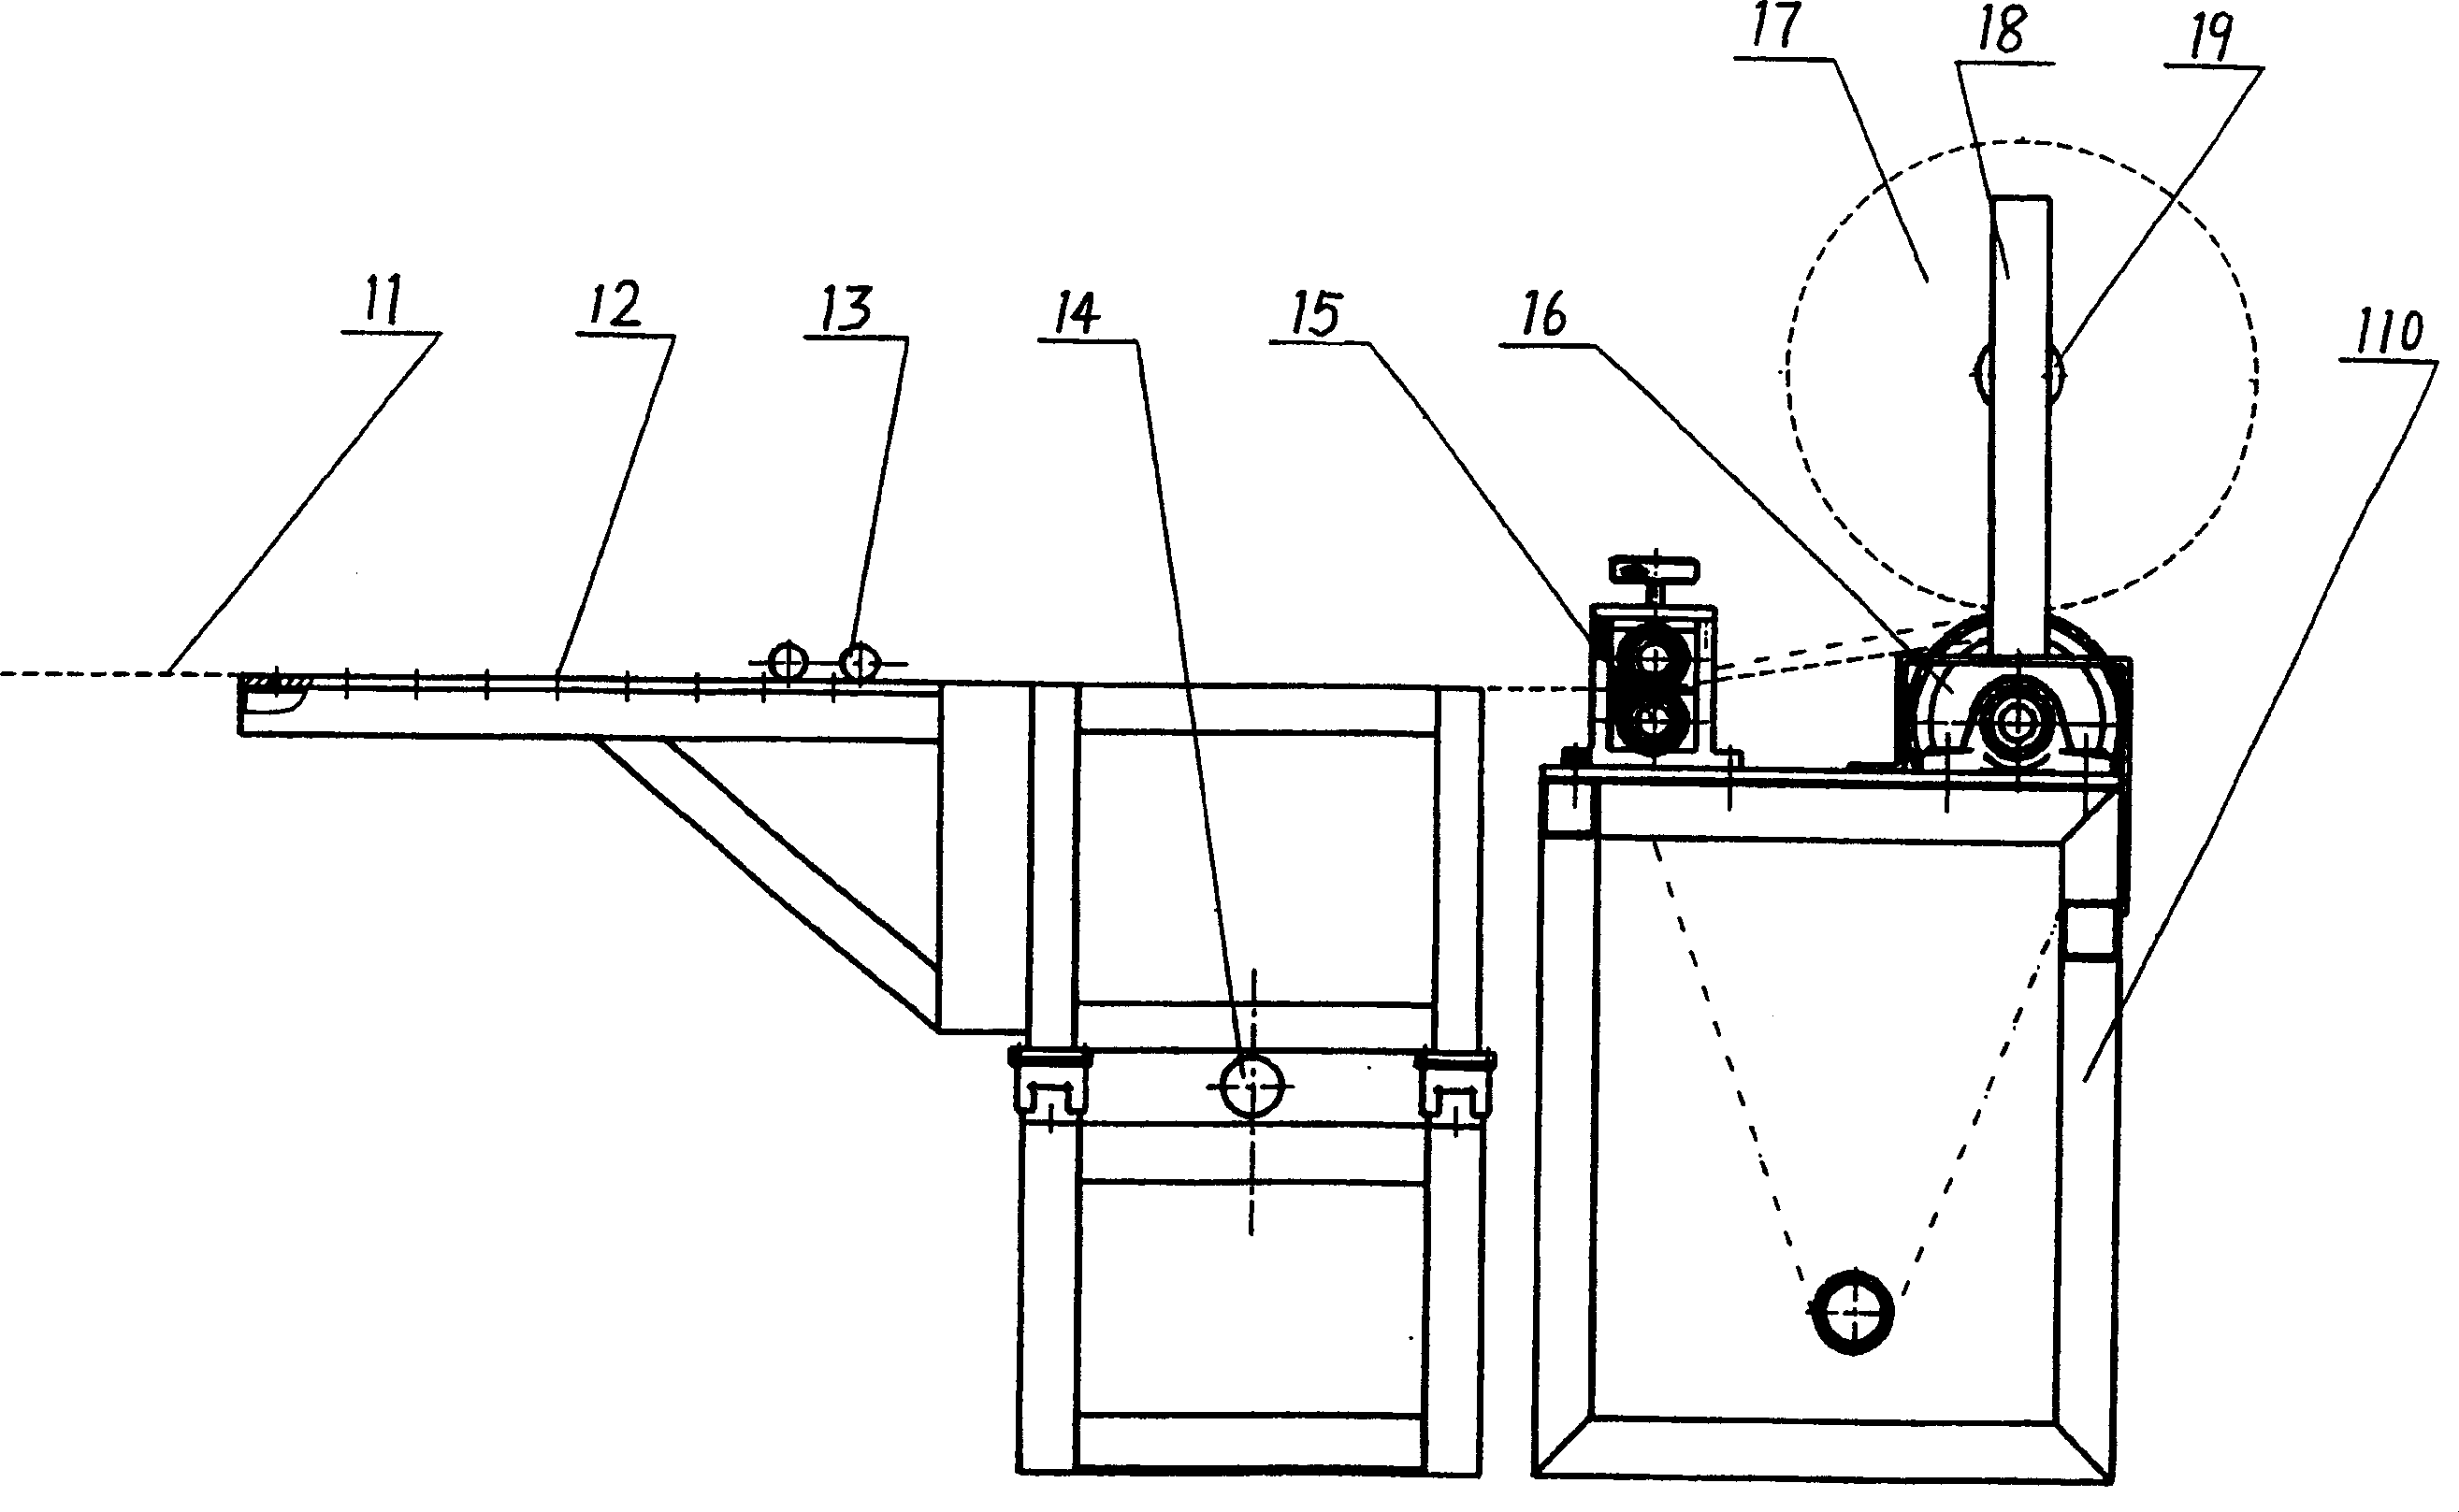 Equipment for continuous automatic measuring resistance of conducting material